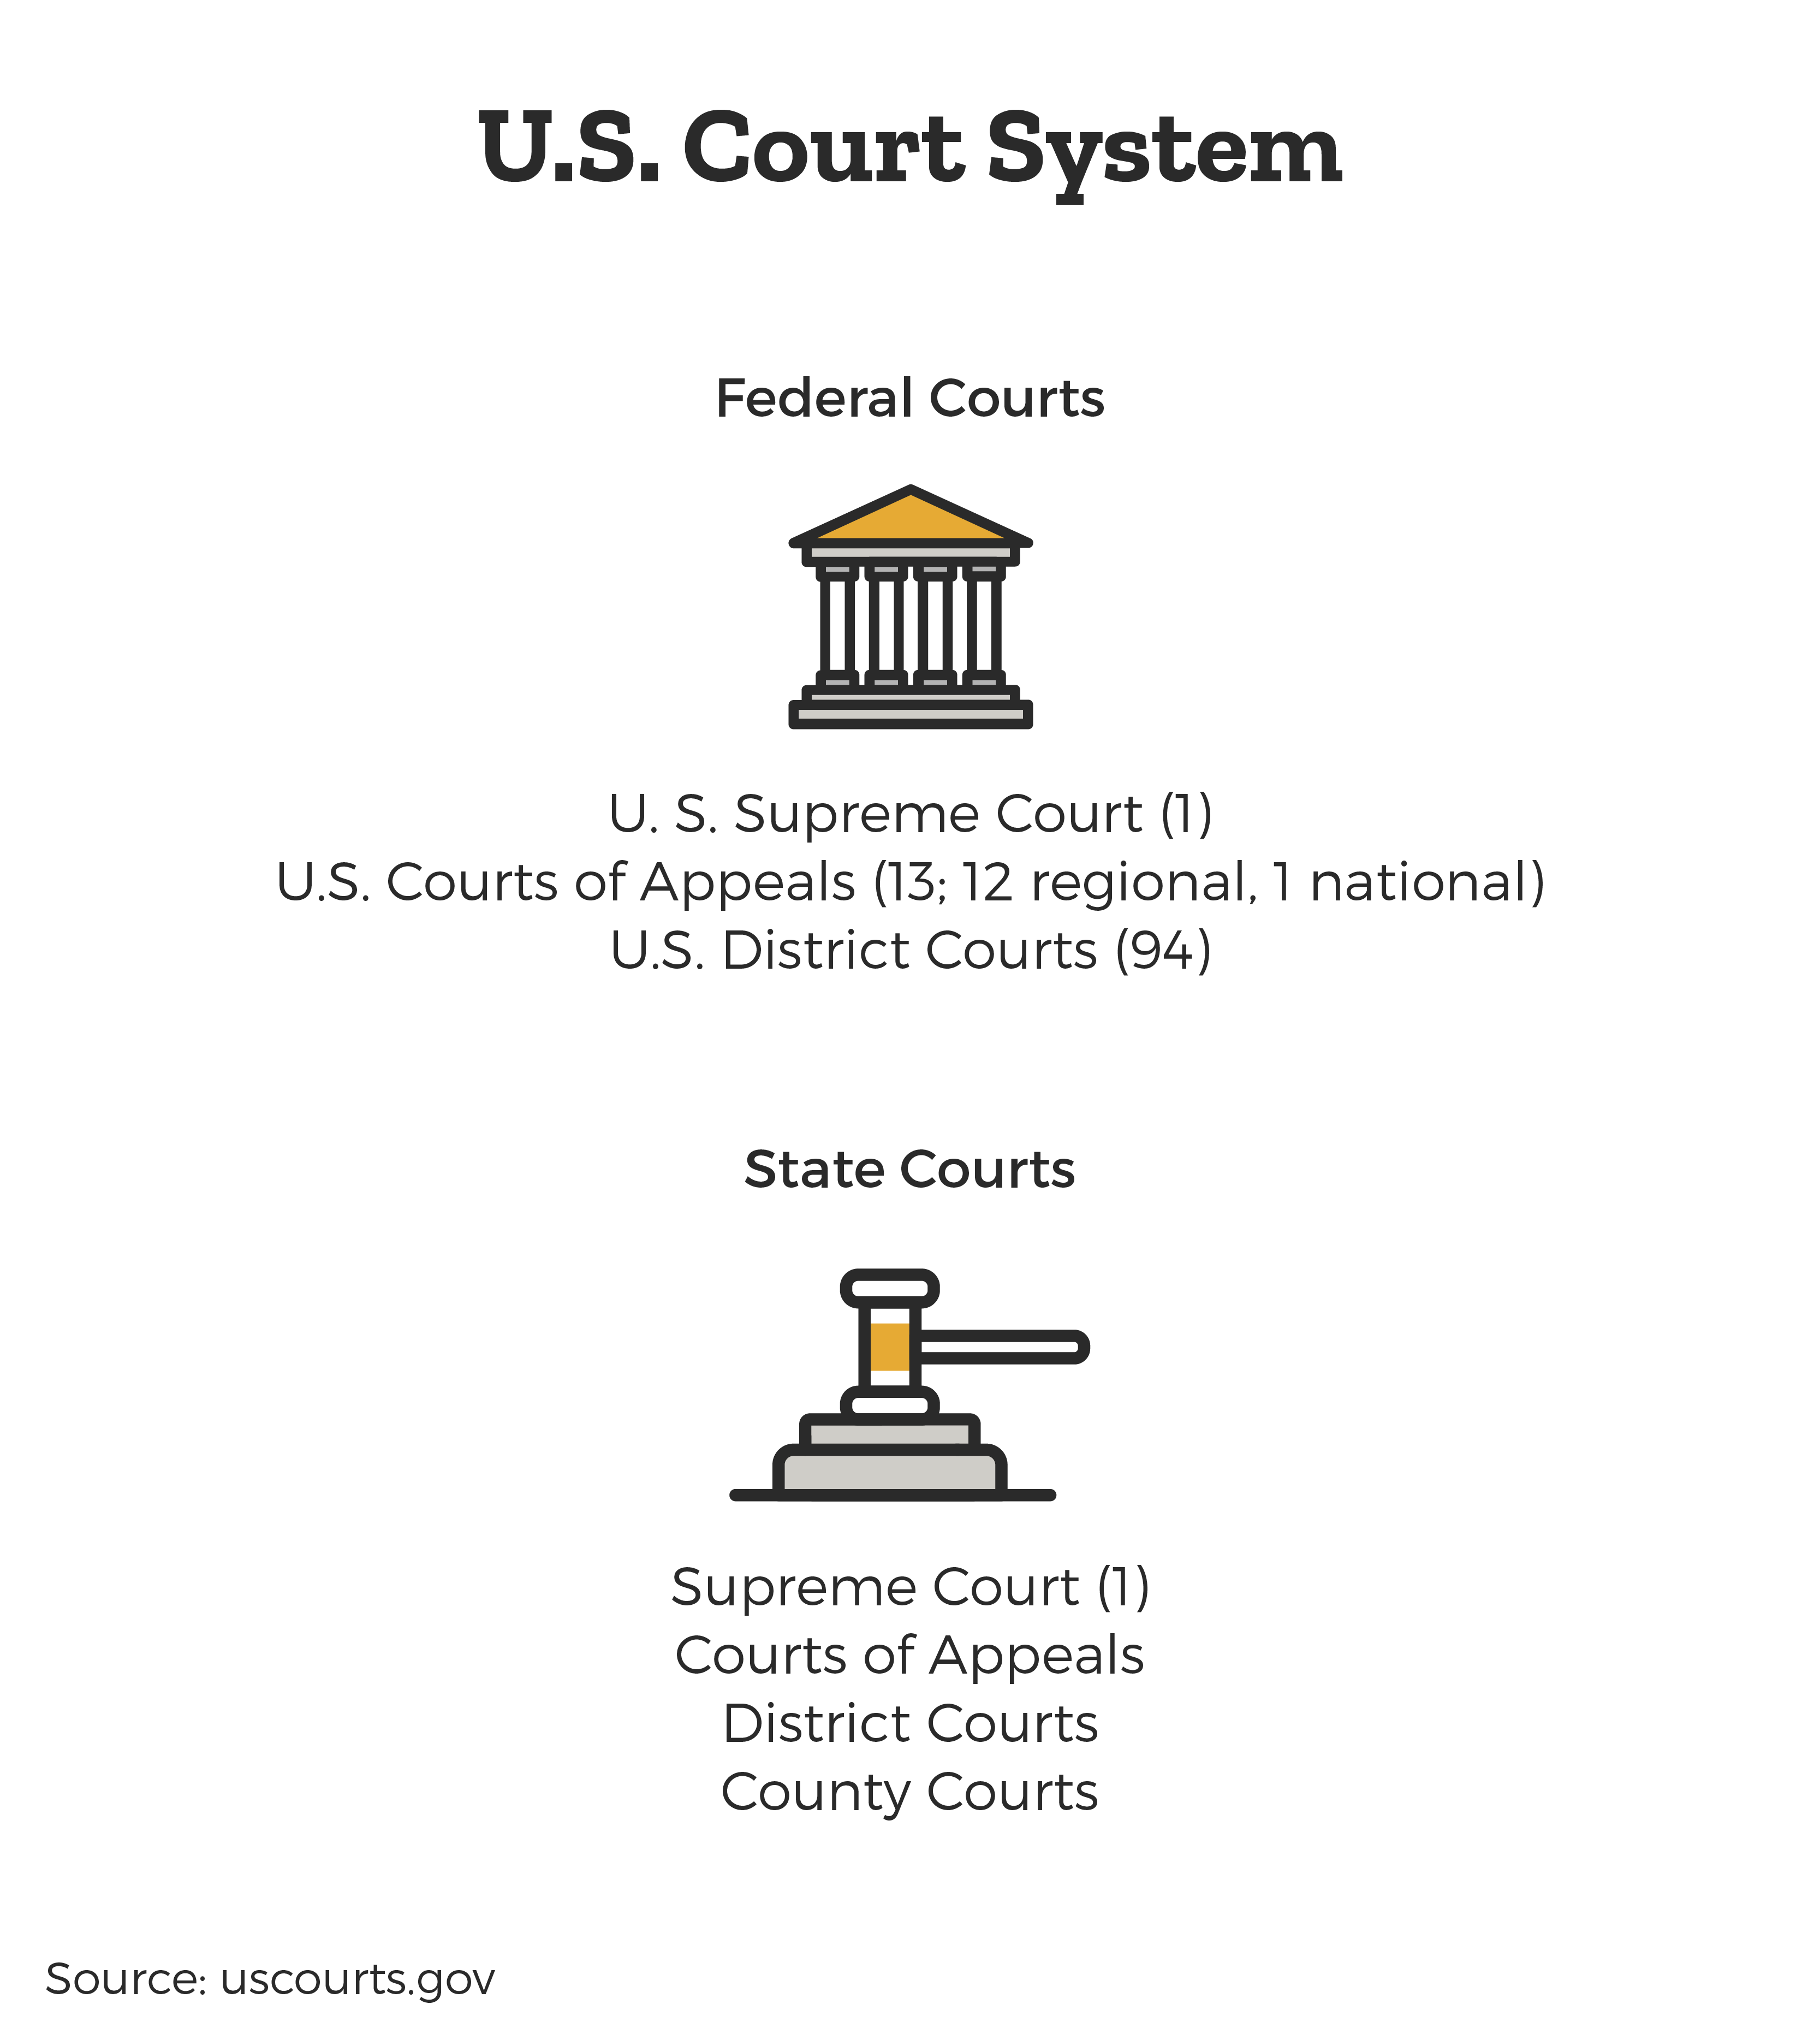 US Court Structure - Federal Courts, State Courts